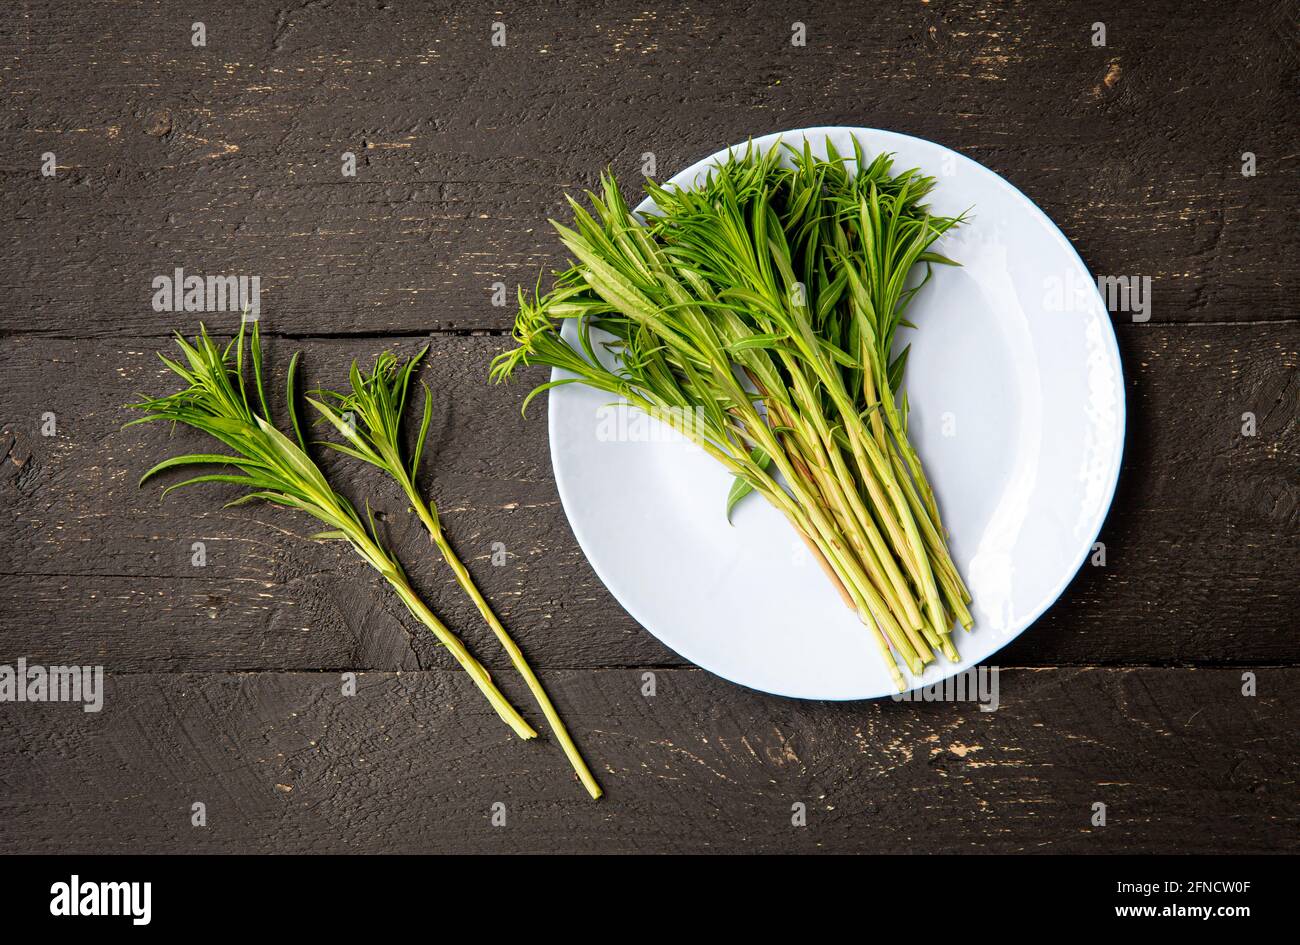 Flat lay of green willowherb or known as fireweed Chamaenerion angustifolium young fresh shroots in spring in home kitchen preparations for making foo Stock Photo